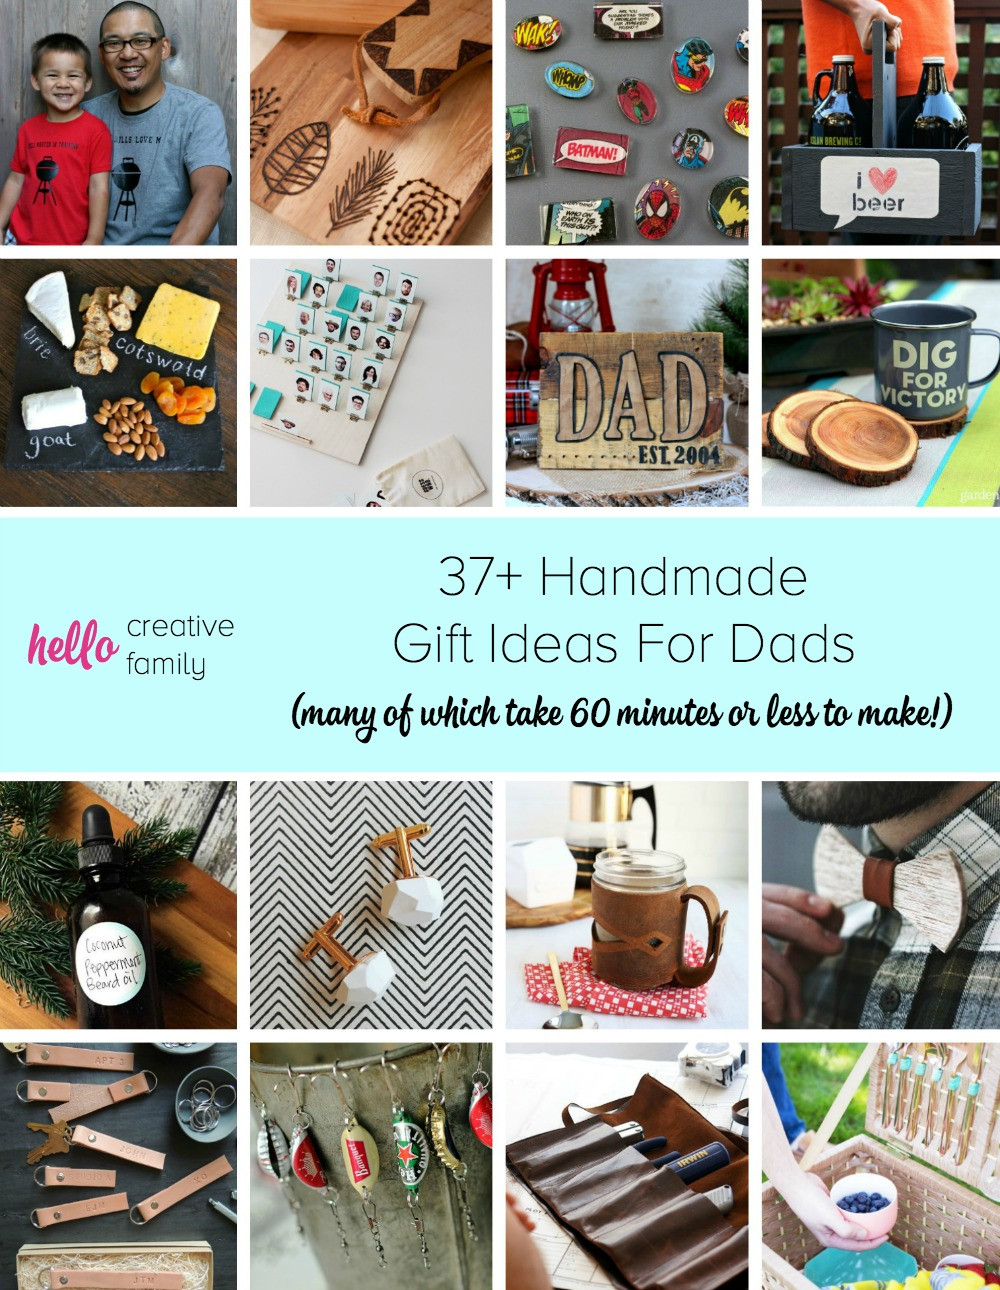 DIY Birthday Gifts For Dad
 37 Handmade Gift Ideas For Dads many of which take 60